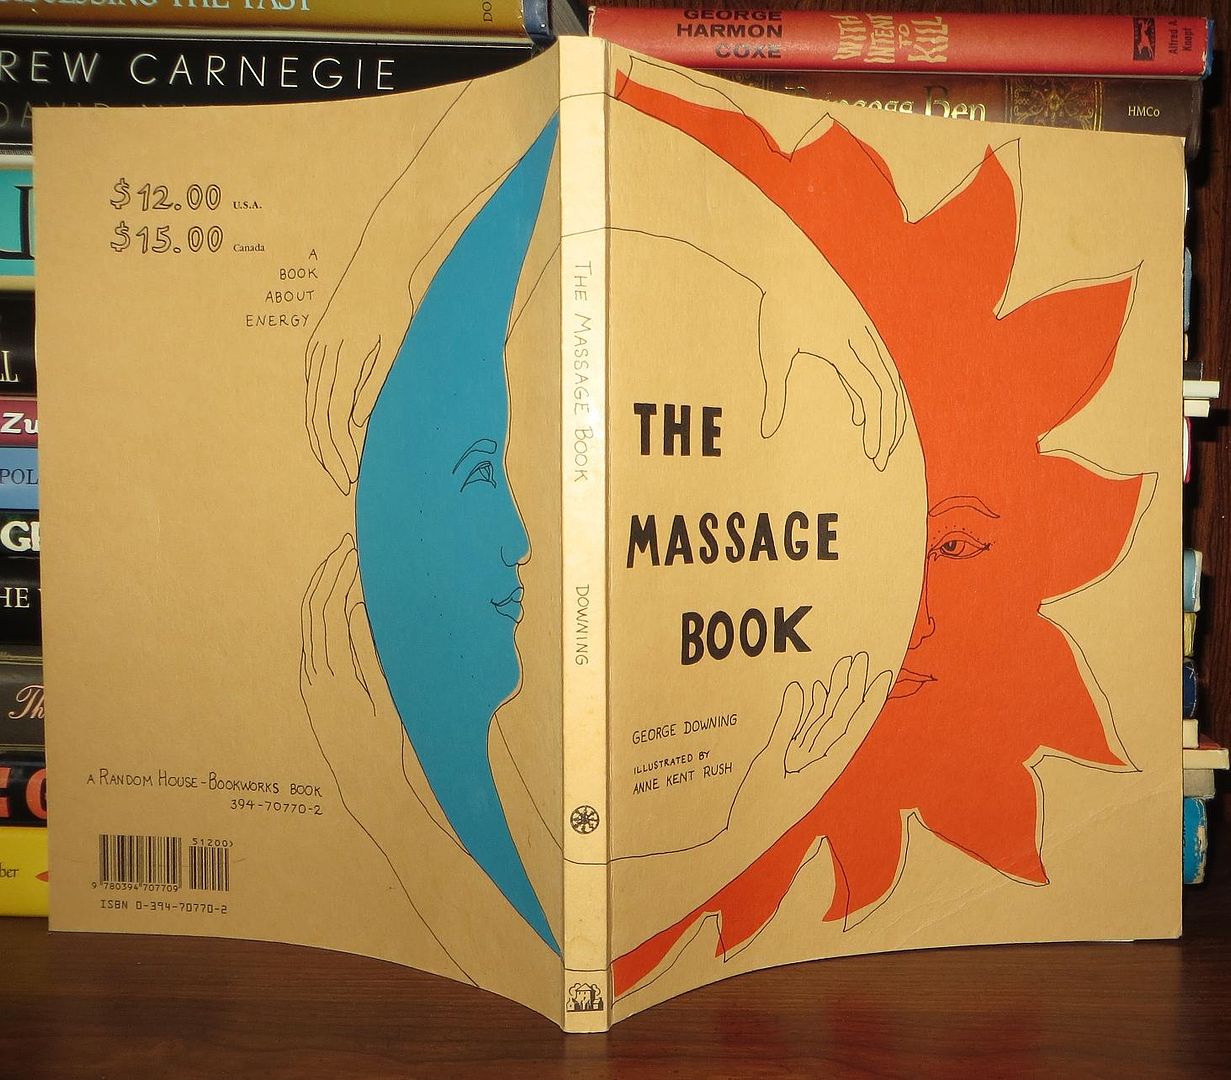 DOWNING, GEORGE & ANNE KENT RUSH - The Massage Book